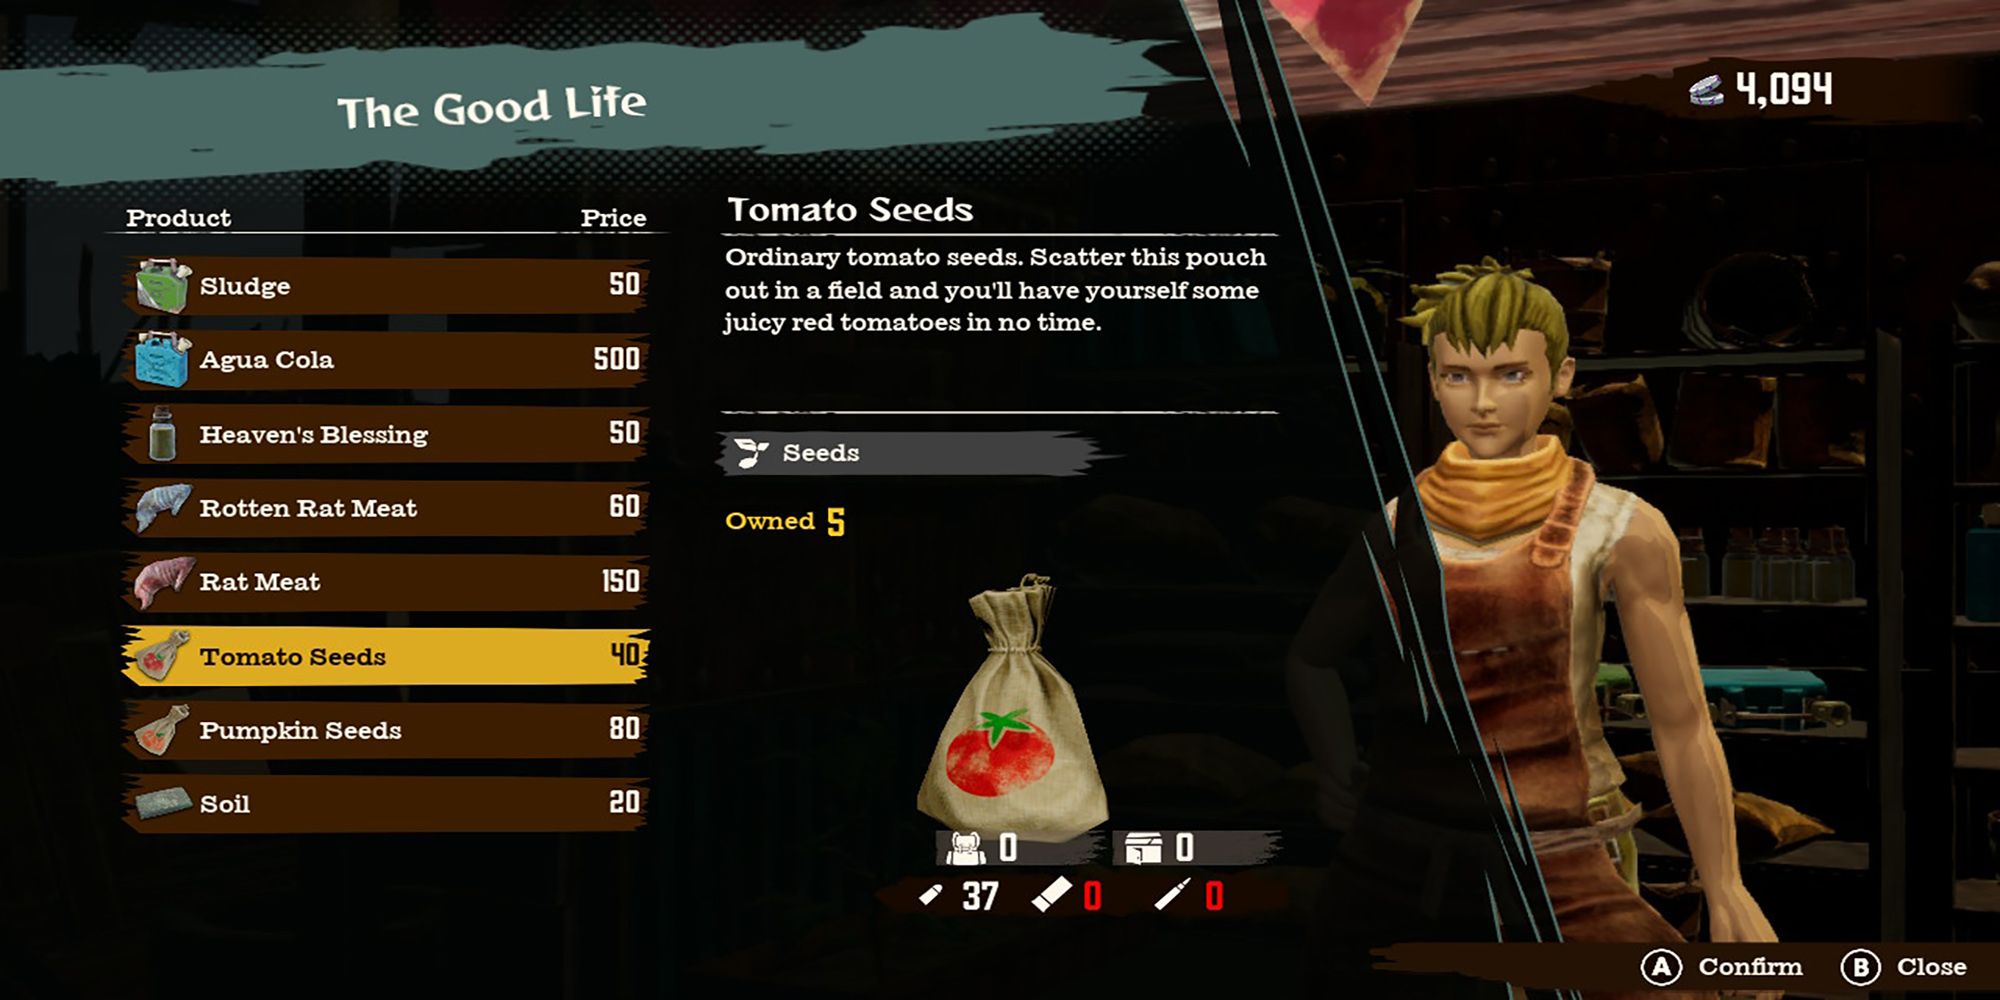 A display of Tomato seeds at The Good Life market in The Slums in Deadcraft.